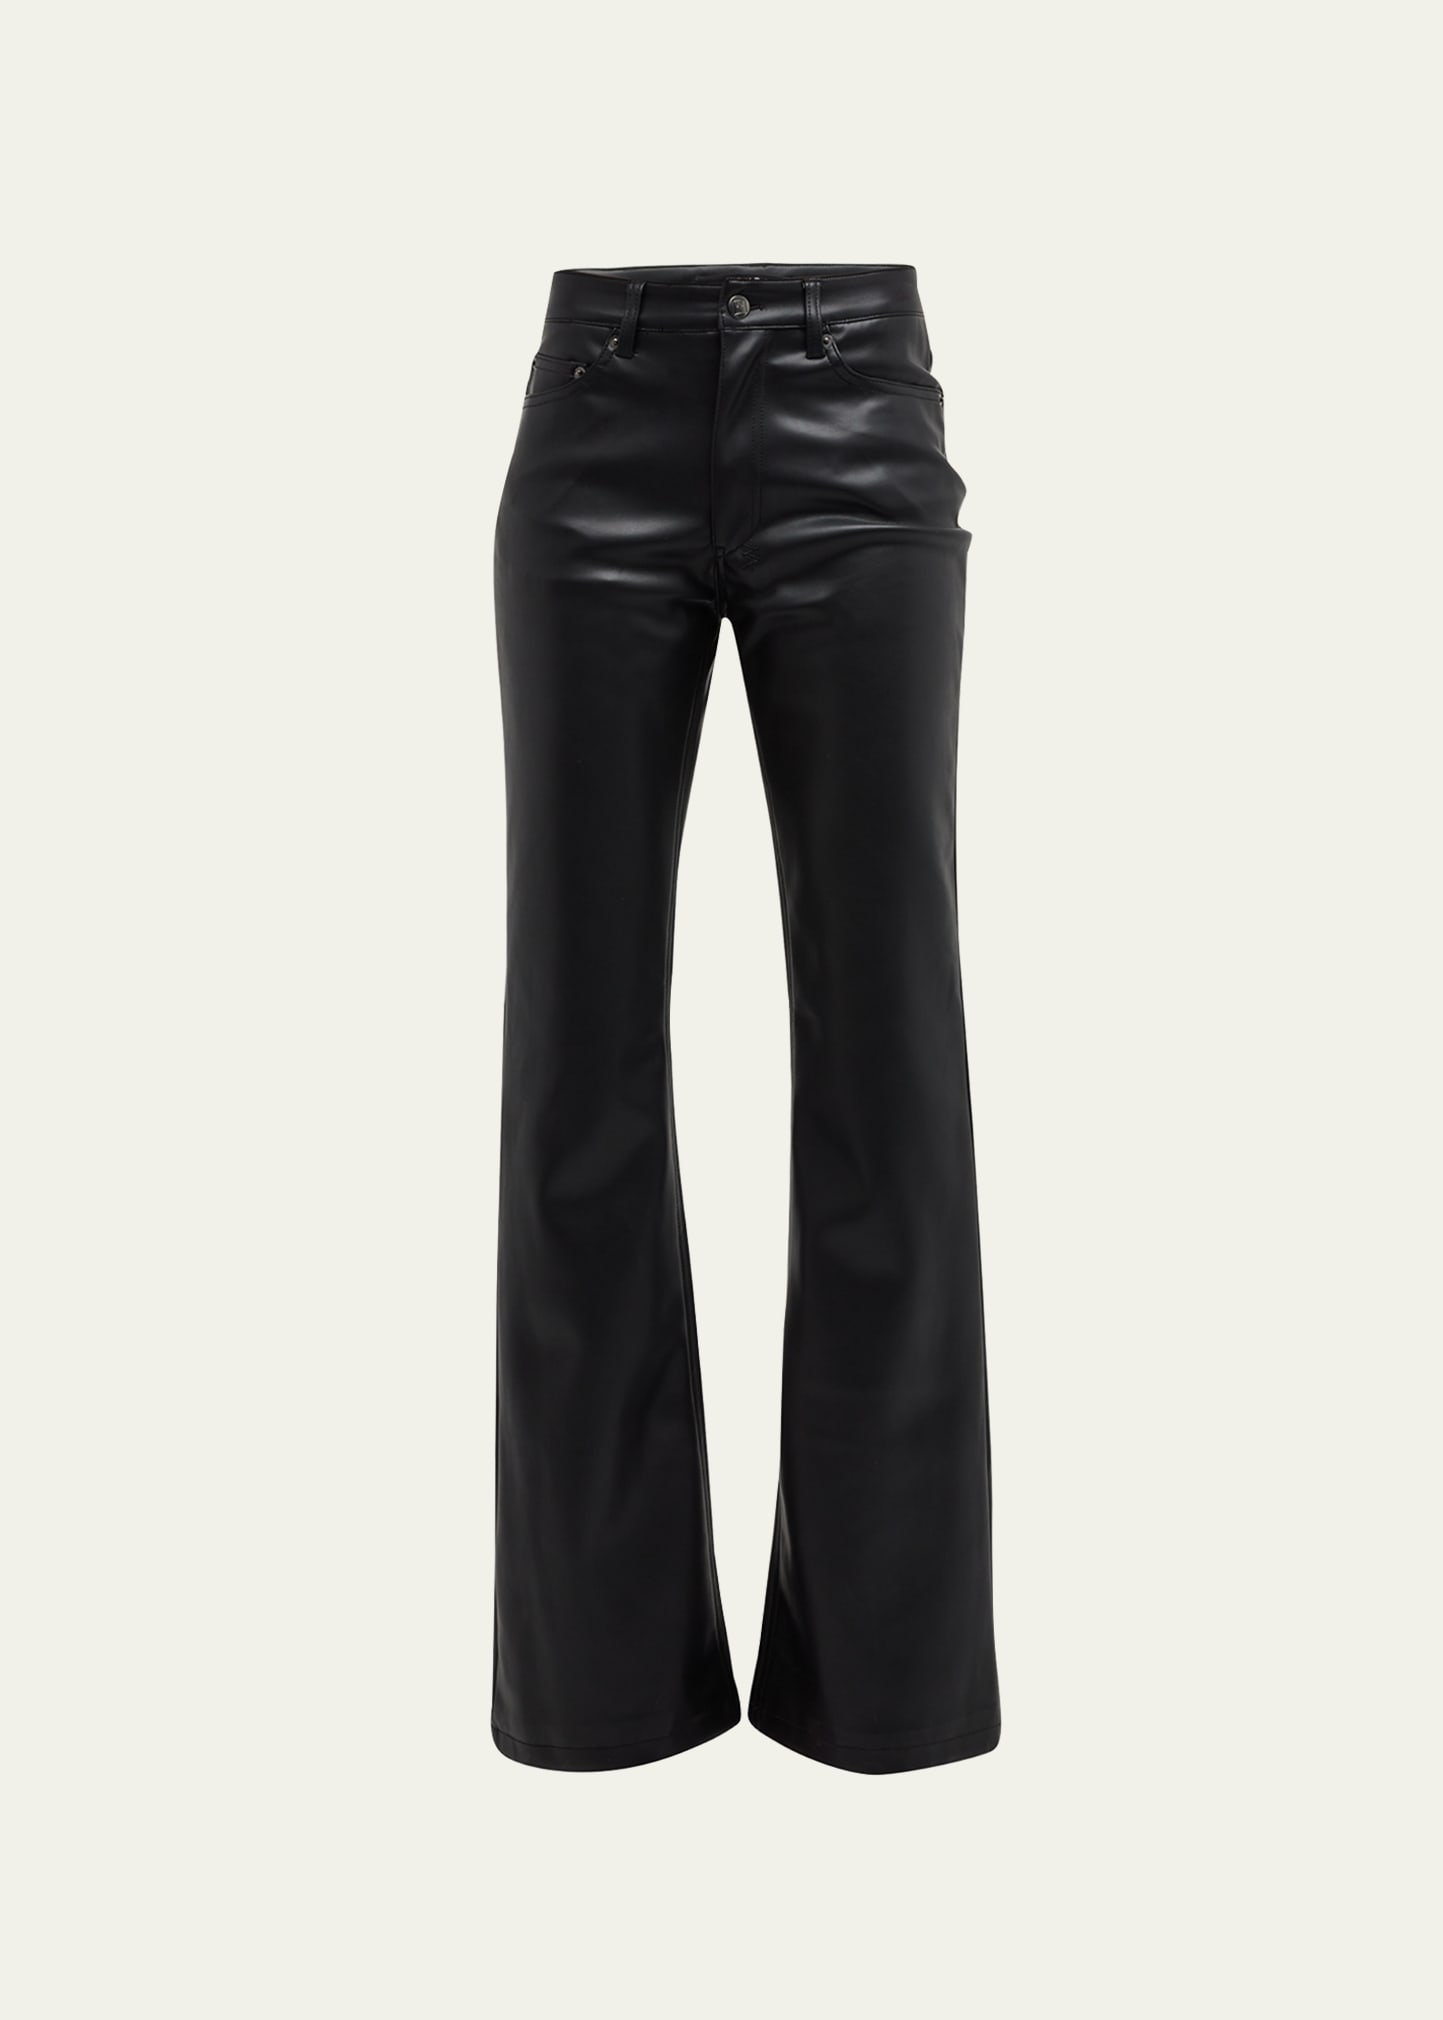 Soho Faux Leather Bootcut Jeans